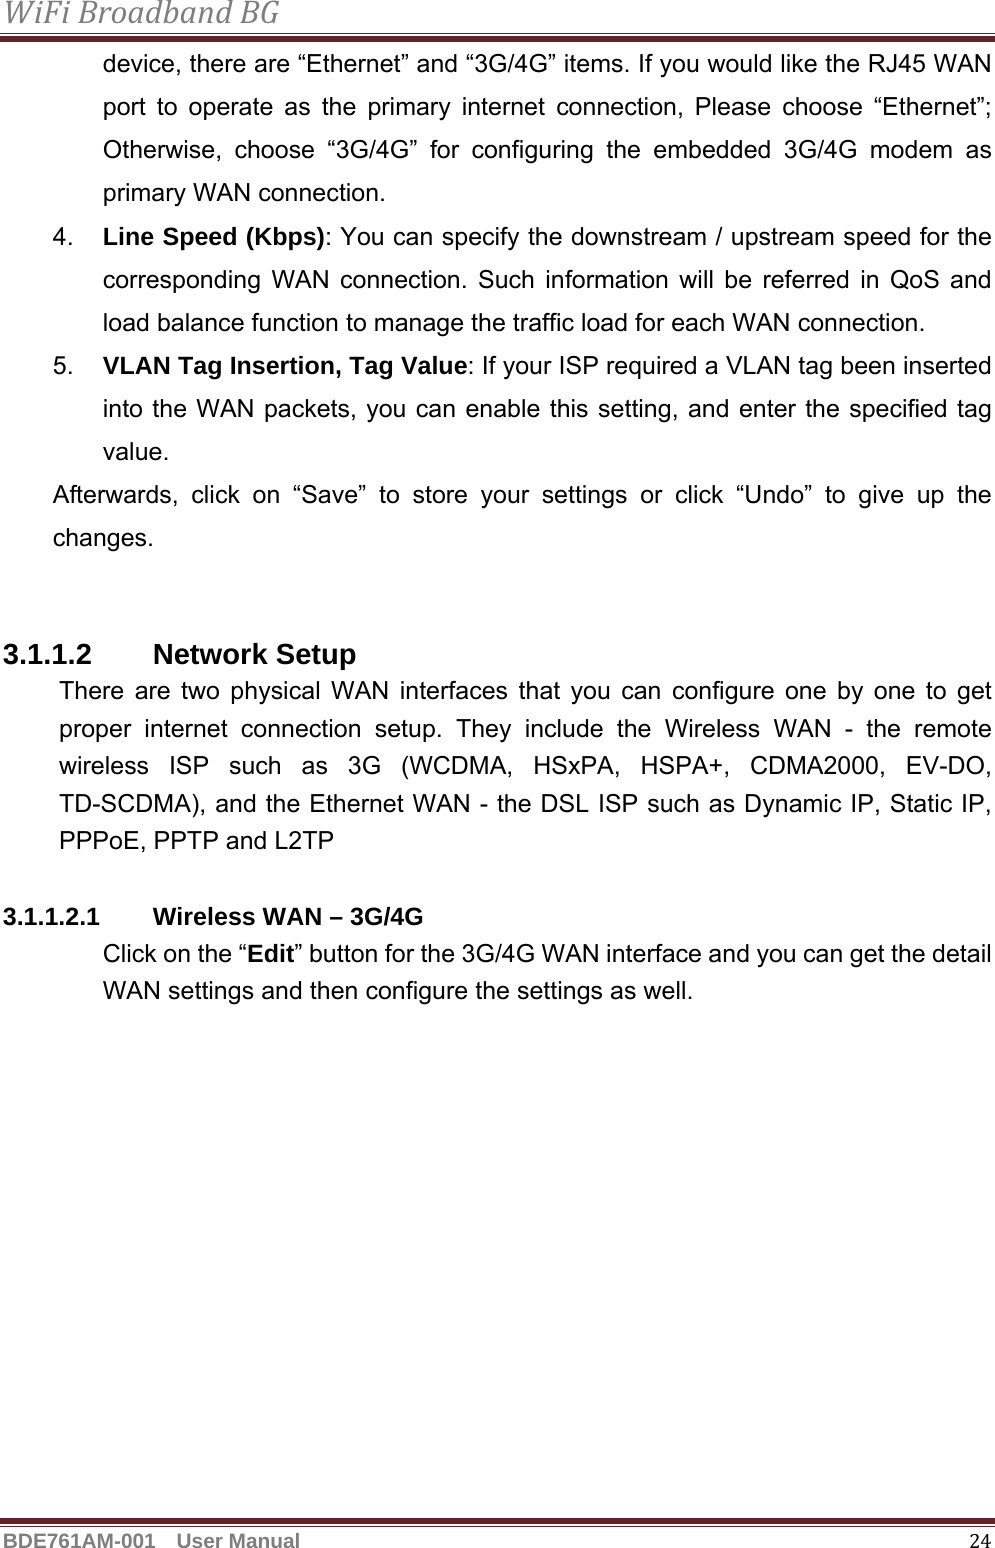 WiFiBroadbandBGBDE761AM-001  User Manual   24device, there are “Ethernet” and “3G/4G” items. If you would like the RJ45 WAN port to operate as the primary internet connection, Please choose “Ethernet”; Otherwise, choose “3G/4G” for configuring the embedded 3G/4G modem as primary WAN connection. 4.  Line Speed (Kbps): You can specify the downstream / upstream speed for the corresponding WAN connection. Such information will be referred in QoS and load balance function to manage the traffic load for each WAN connection. 5.  VLAN Tag Insertion, Tag Value: If your ISP required a VLAN tag been inserted into the WAN packets, you can enable this setting, and enter the specified tag value.  Afterwards, click on “Save” to store your settings or click “Undo” to give up the changes.   3.1.1.2 Network Setup There are two physical WAN interfaces that you can configure one by one to get proper internet connection setup. They include the Wireless WAN - the remote wireless ISP such as 3G (WCDMA, HSxPA, HSPA+, CDMA2000, EV-DO, TD-SCDMA), and the Ethernet WAN - the DSL ISP such as Dynamic IP, Static IP, PPPoE, PPTP and L2TP  3.1.1.2.1 Wireless WAN – 3G/4G Click on the “Edit” button for the 3G/4G WAN interface and you can get the detail WAN settings and then configure the settings as well. 